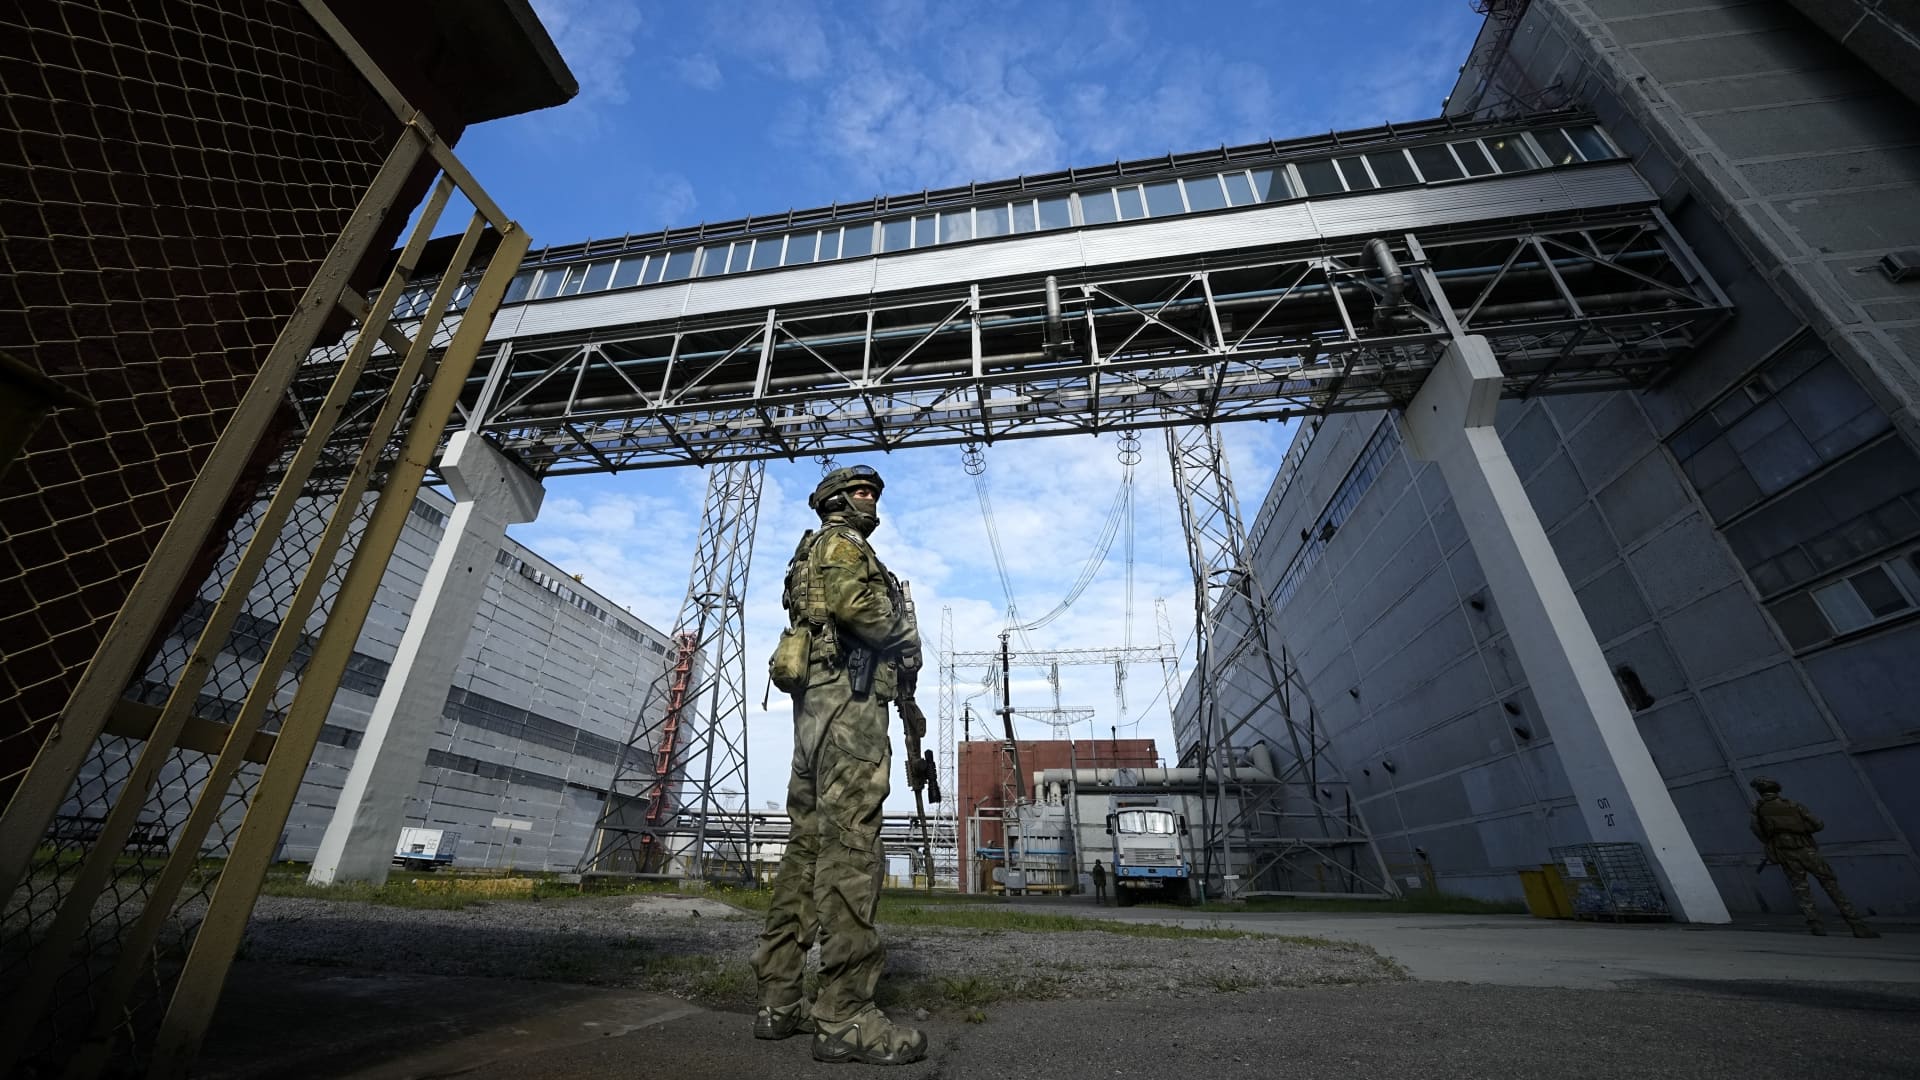 A Russian serviceman guards an area of the Zaporizhzhia Nuclear Power Station in territory under Russian military control, in southeastern Ukraine, on May 1, 2022.